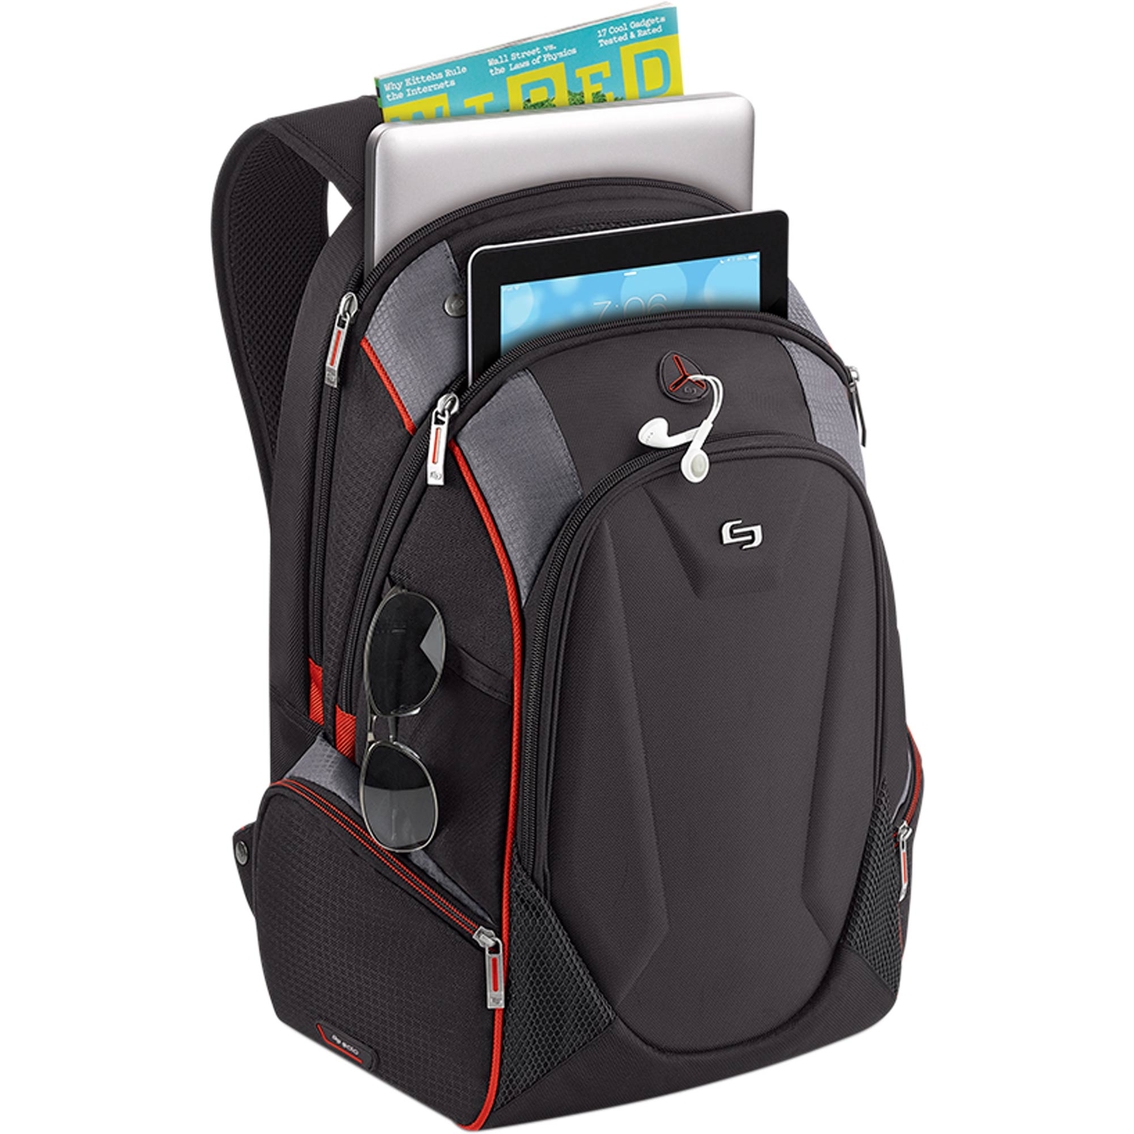 Solo Launch 17.3 in. Backpack, Black/Gray with Red Trim - Image 2 of 4